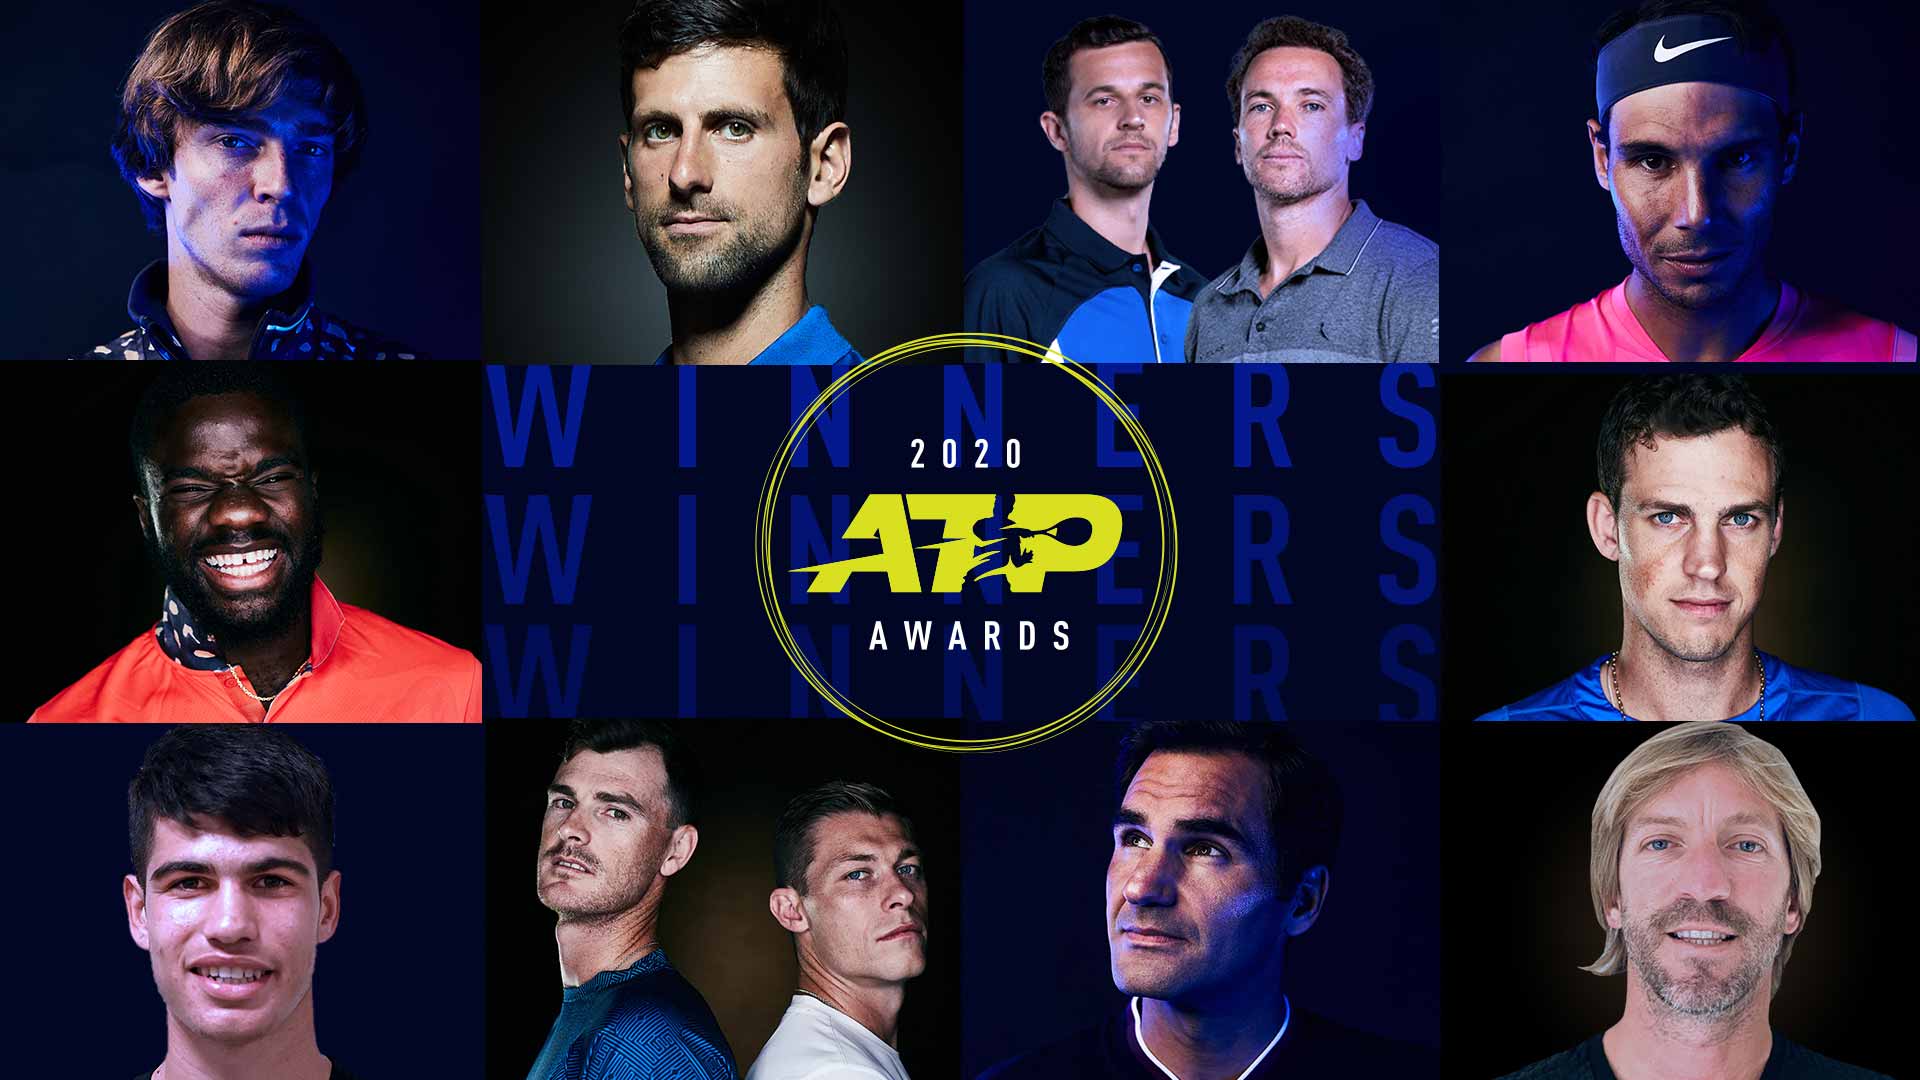 Cirkel bandage Produkt 2020 ATP Awards: And The Winners Are... | ATP Tour | Tennis